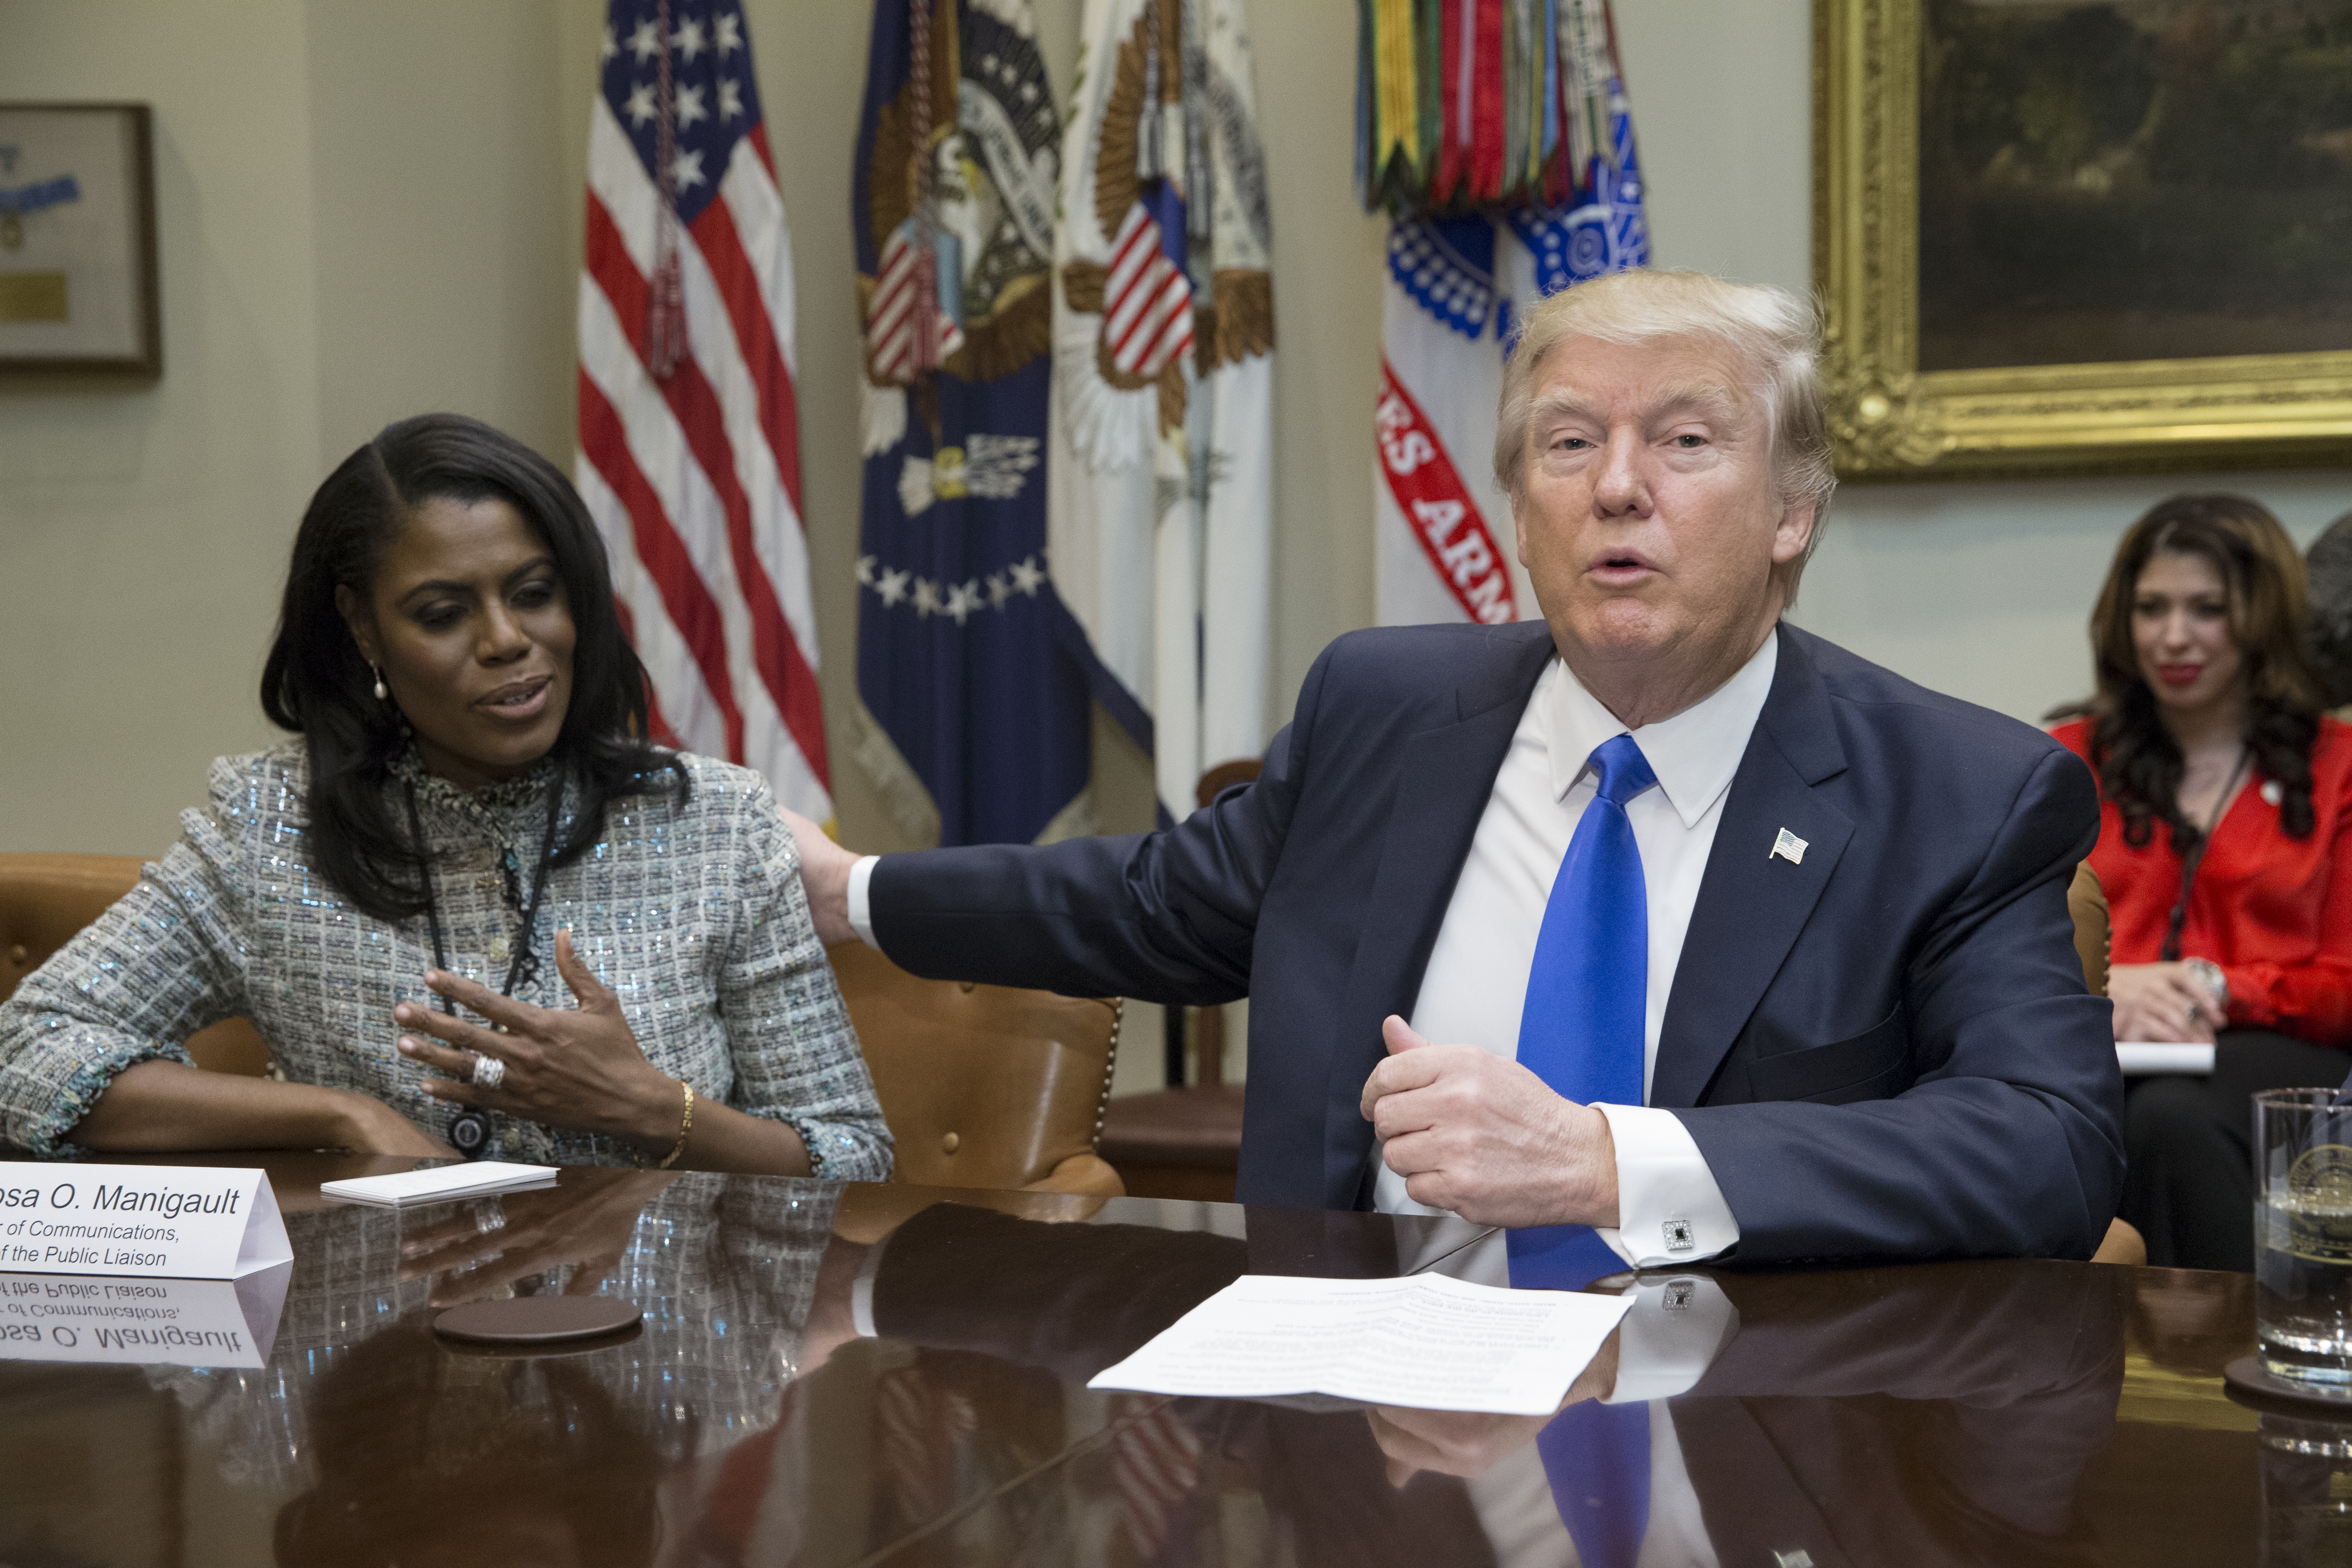 President Donald Trump holds an African American History Month listening session attended by Director of Communications for the Office of Public Liaison Omarosa Manigault and other officials in the Roosevelt Room of the White House on Feb. 1, 2017 in Washington, D.C. (Photo by Michael Reynolds - Pool/Getty Images)